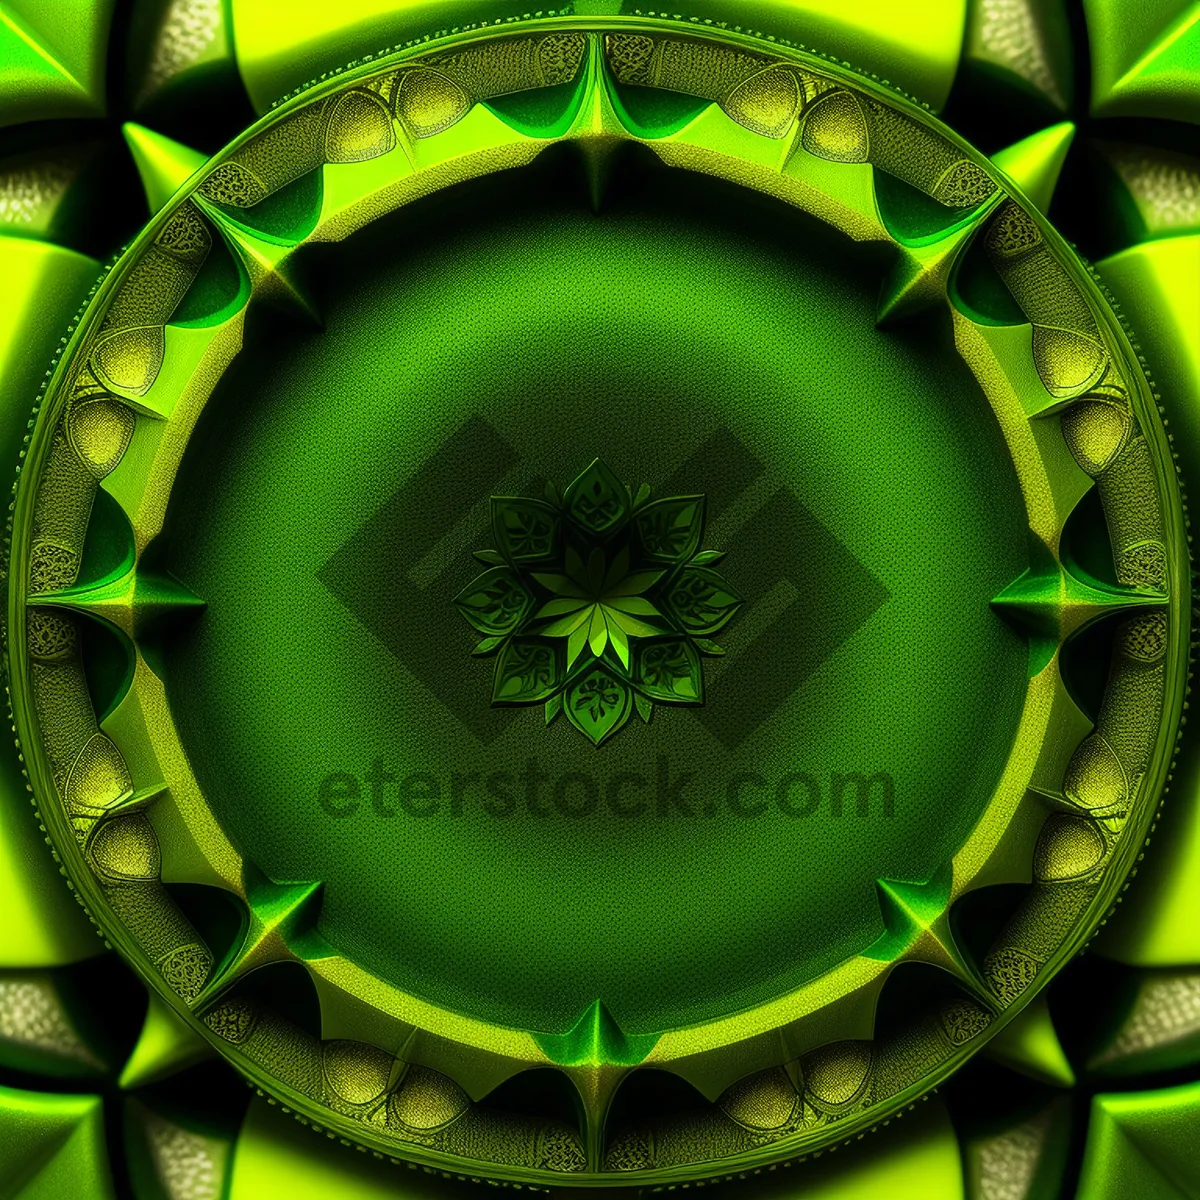 Picture of Colorful Circular Tray: Symmetric Design with Digital Art